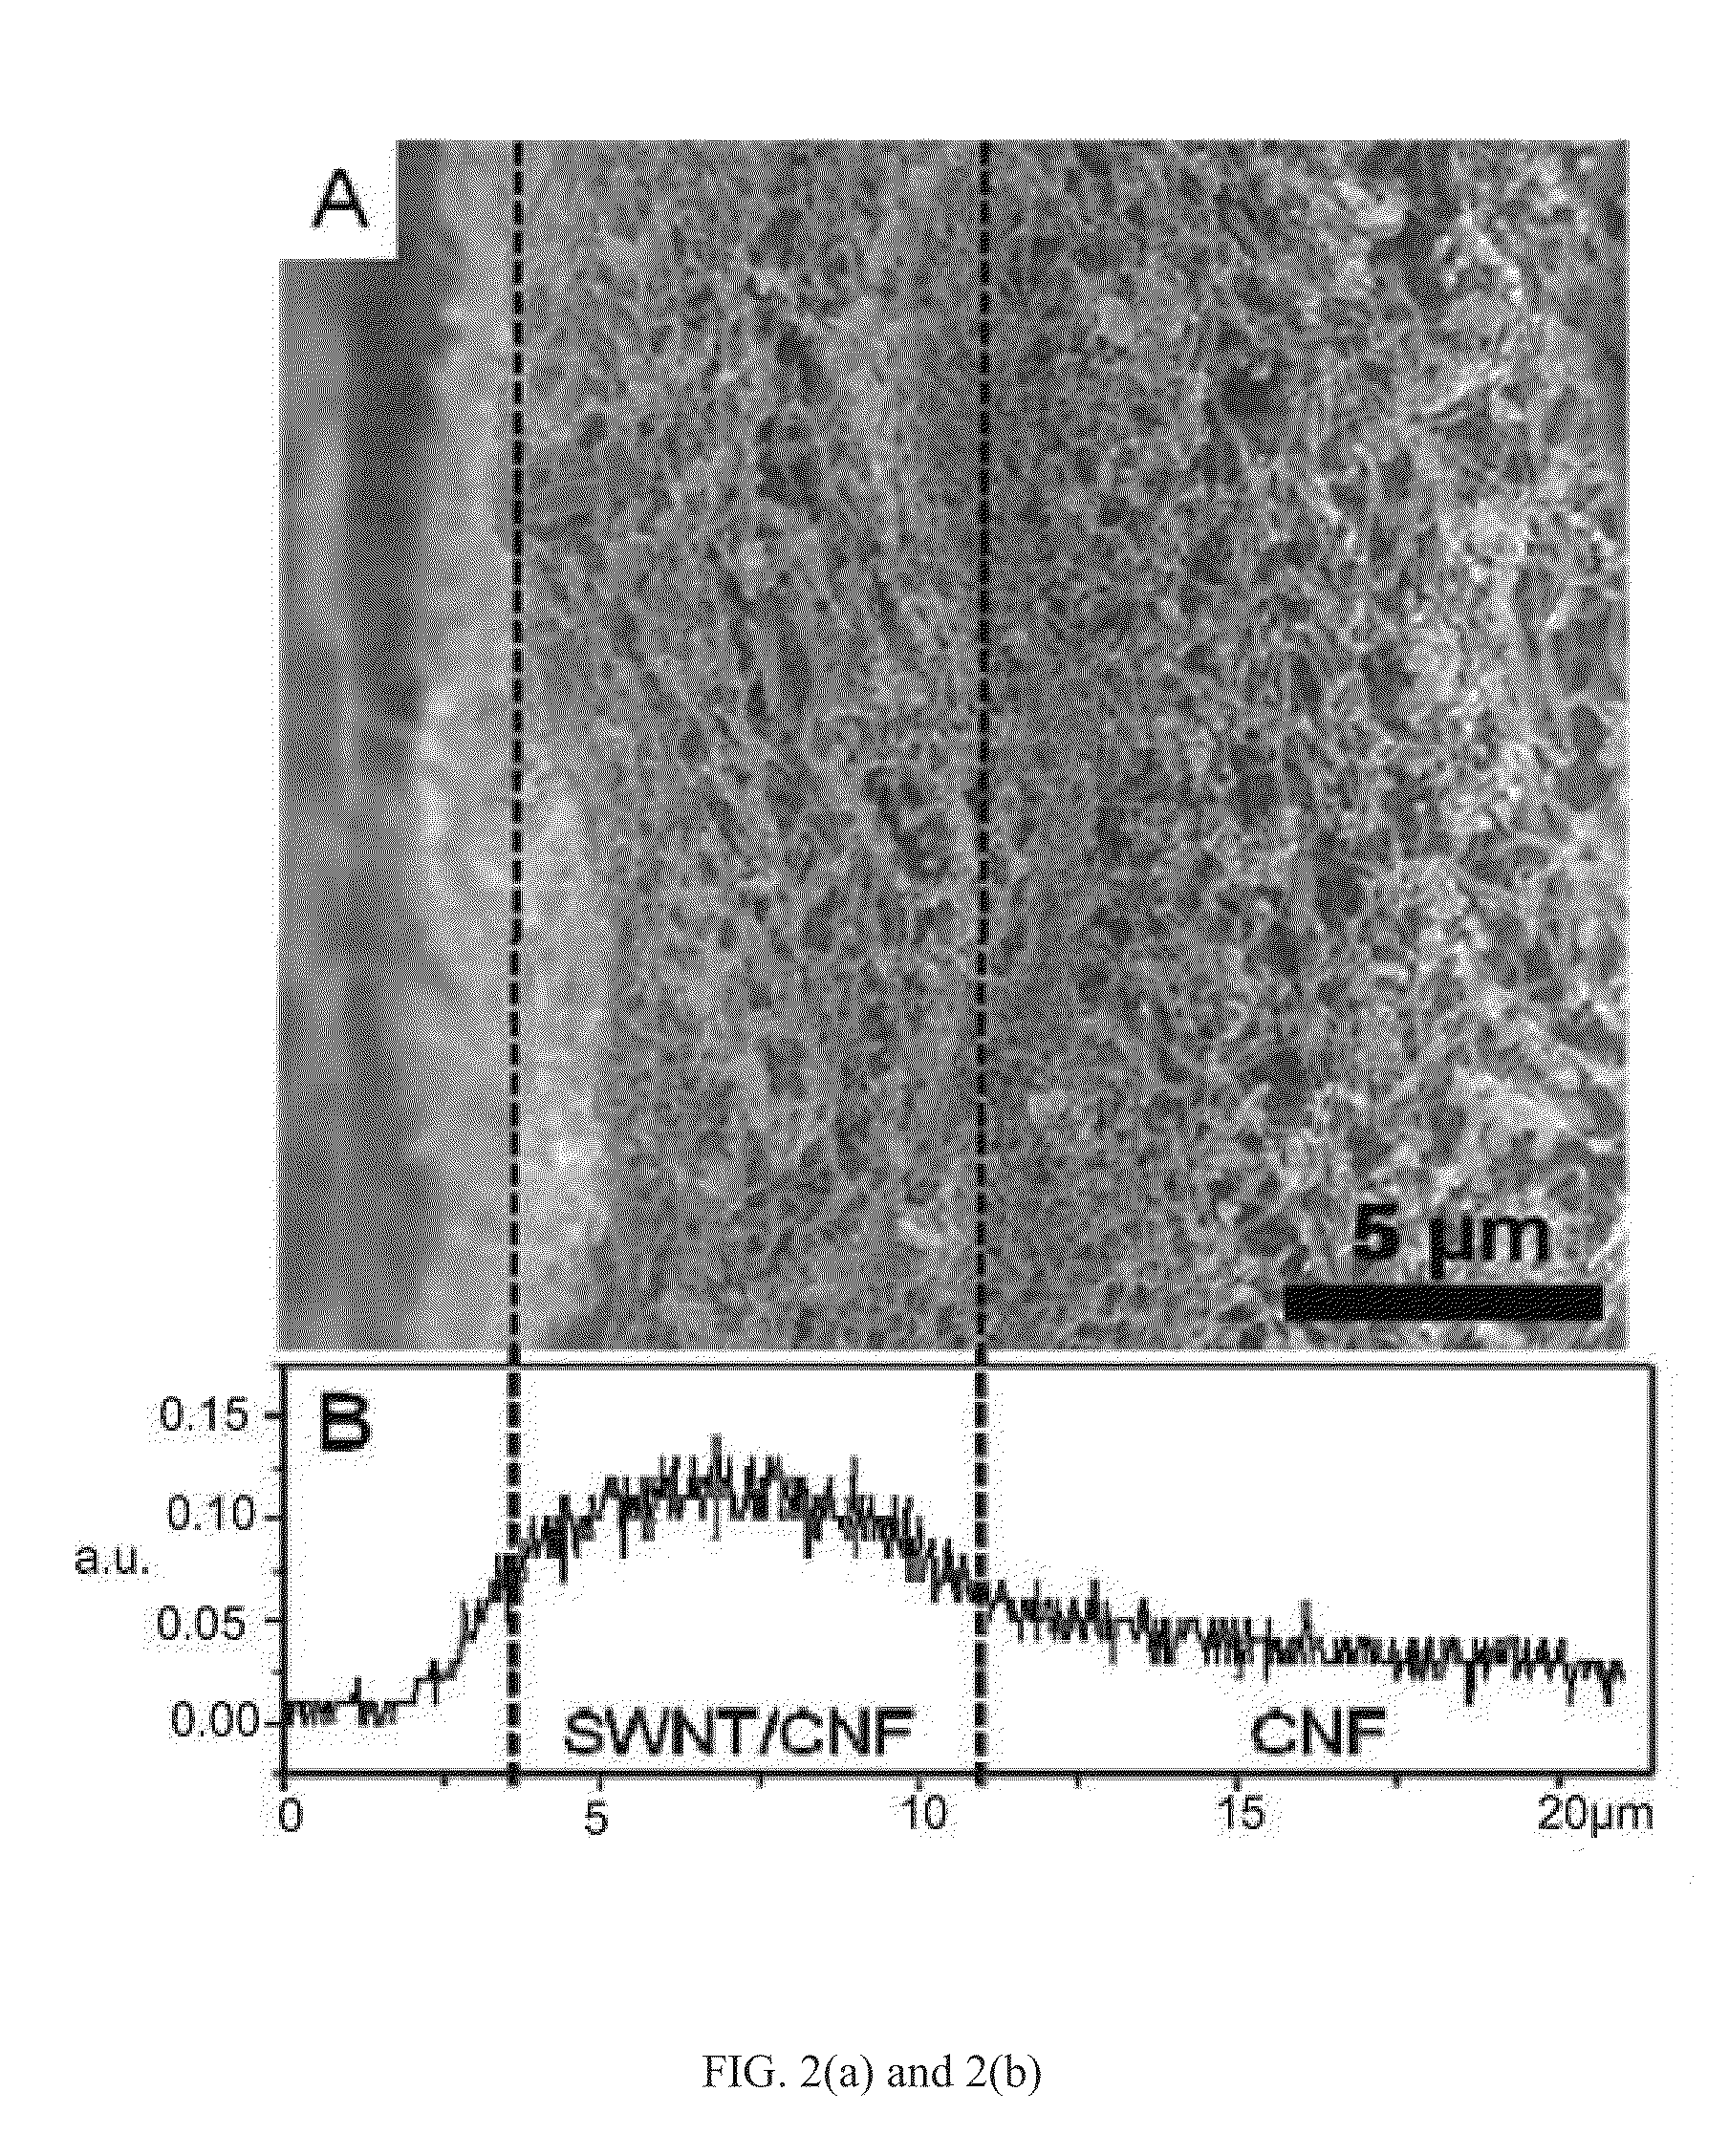 Catalytic electrode with gradient porosity and catalyst density for fuel cells